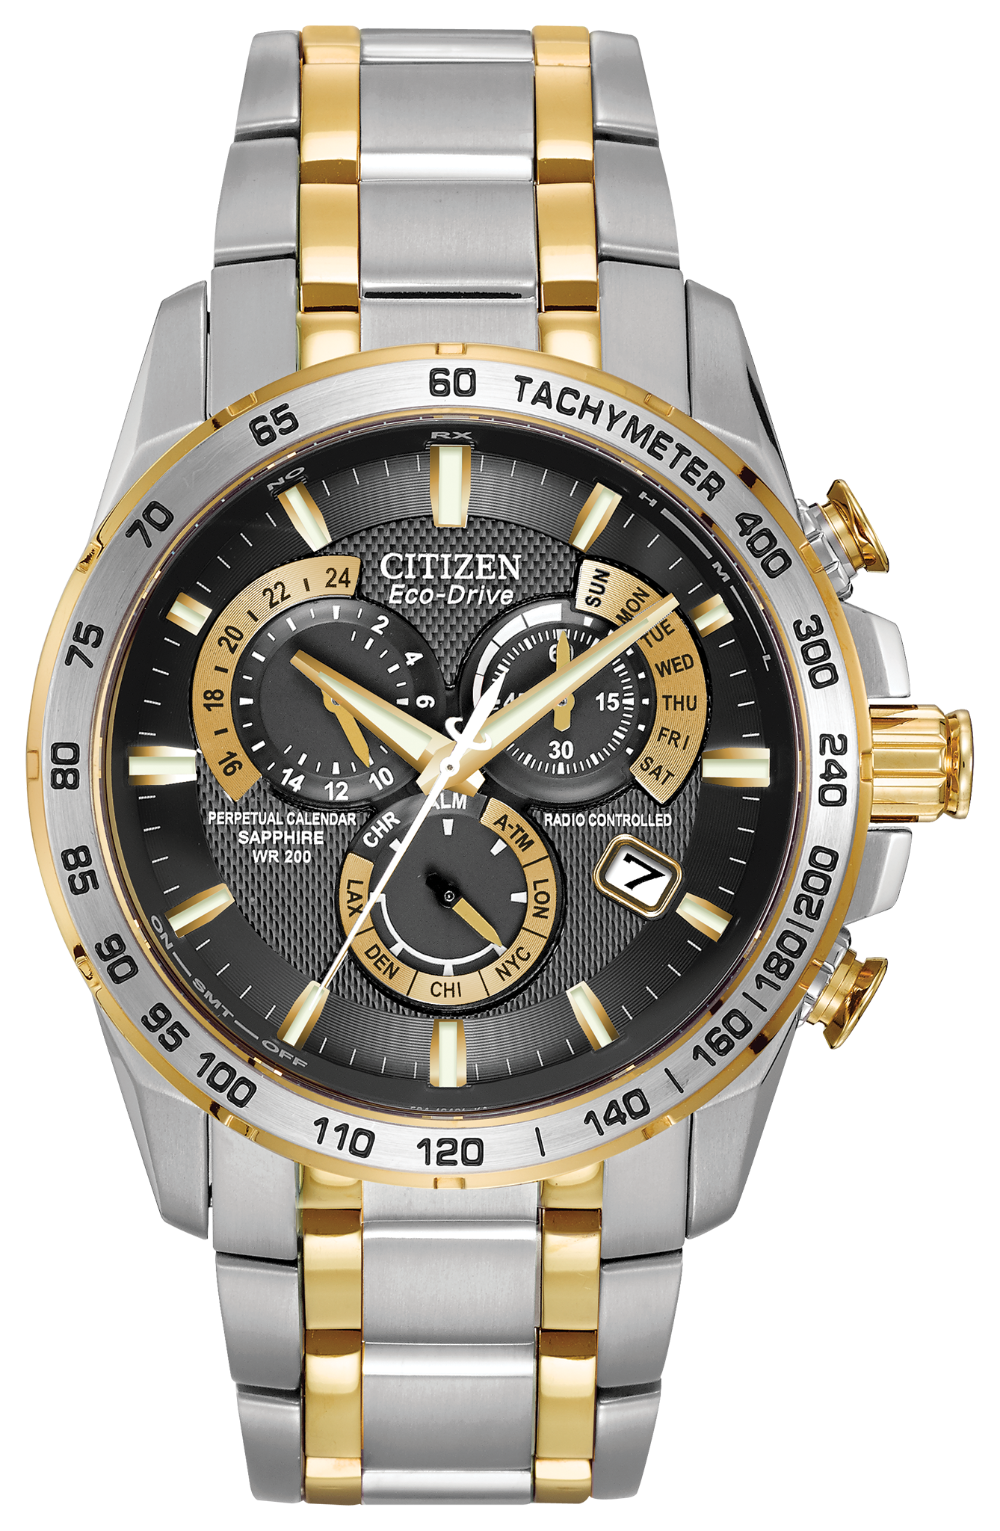 Citizen Eco-Drive Perpetual Chronograph A-T Watch